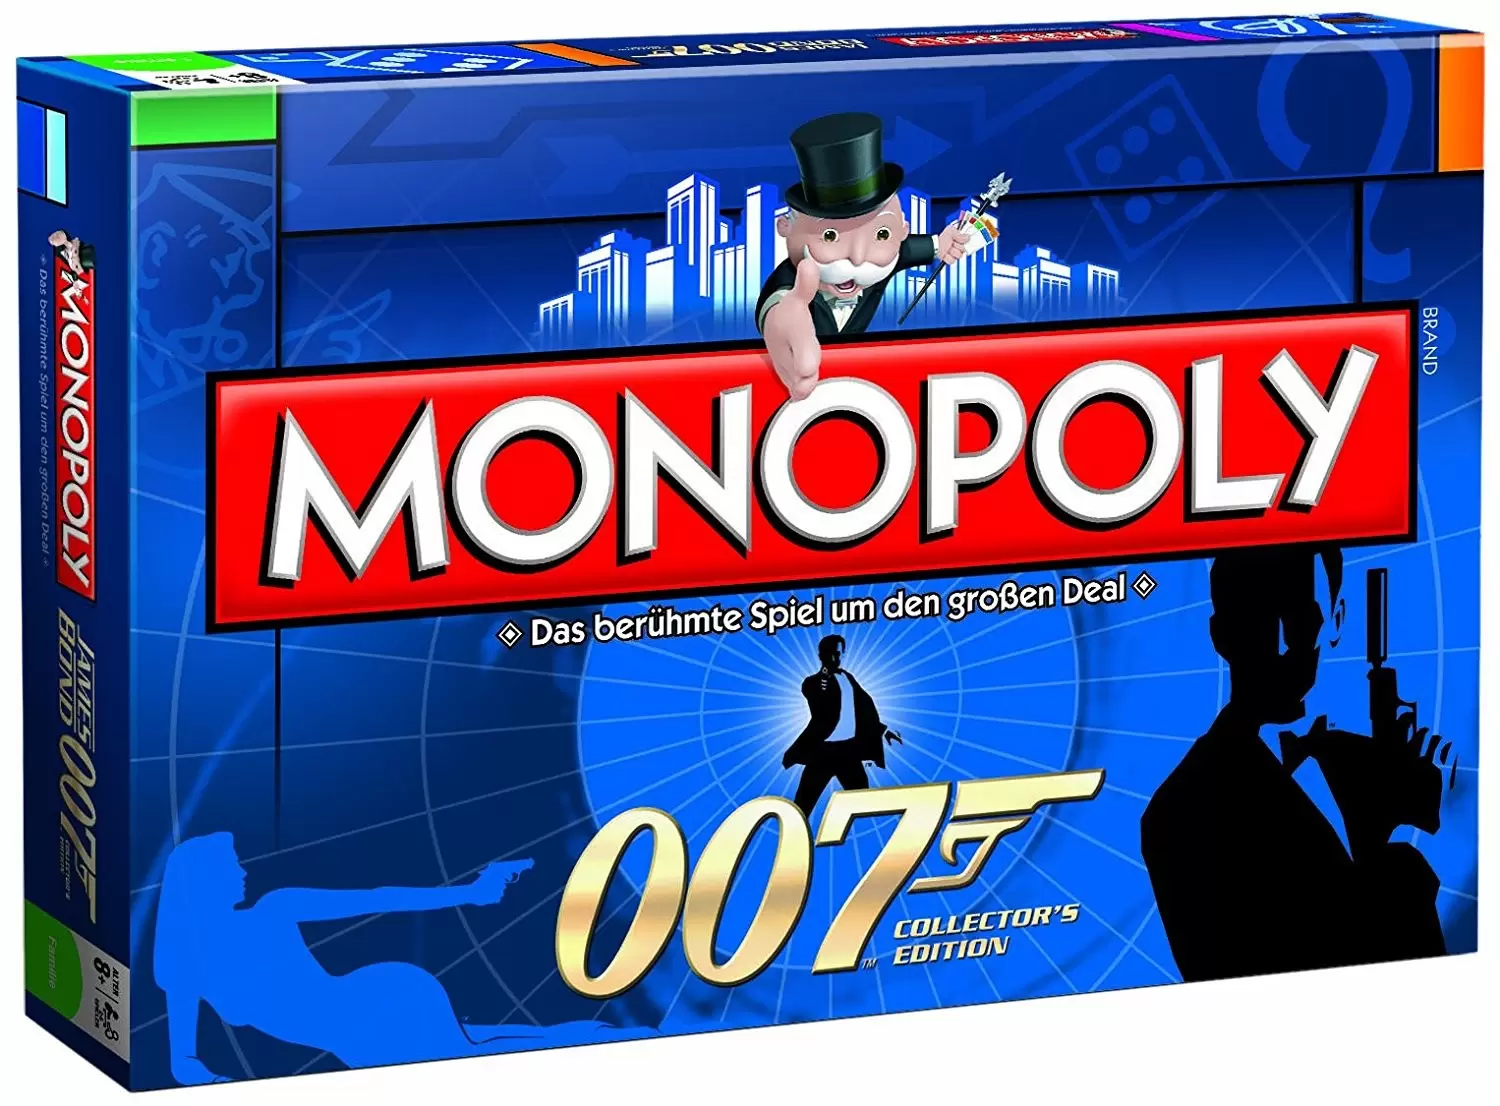 Monopoly Movies & TV Series - Monopoly 007 : Edition collector